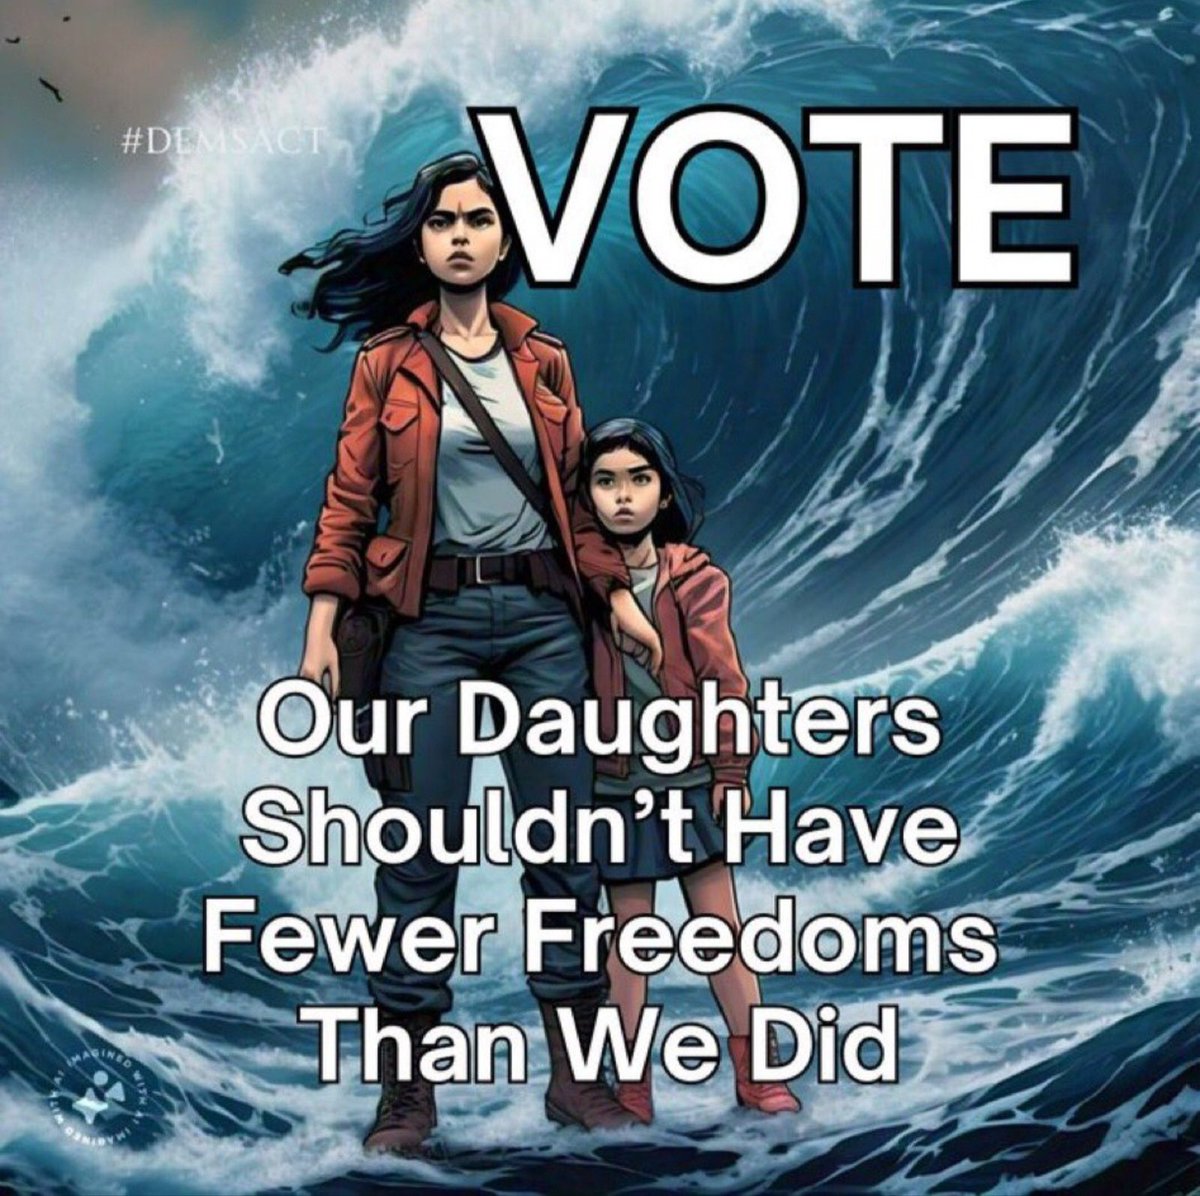 Project 2025 makes clear the Republican intent to strip Women and girls of all Human Rights. Patriarchy, with all of its brutality and abuse, will again be the Law of the Land.

Never!

It's time for the Liberation of ALL Americans!  Vote Democratic!

#VoteBIGBlue.  #DemVoice1